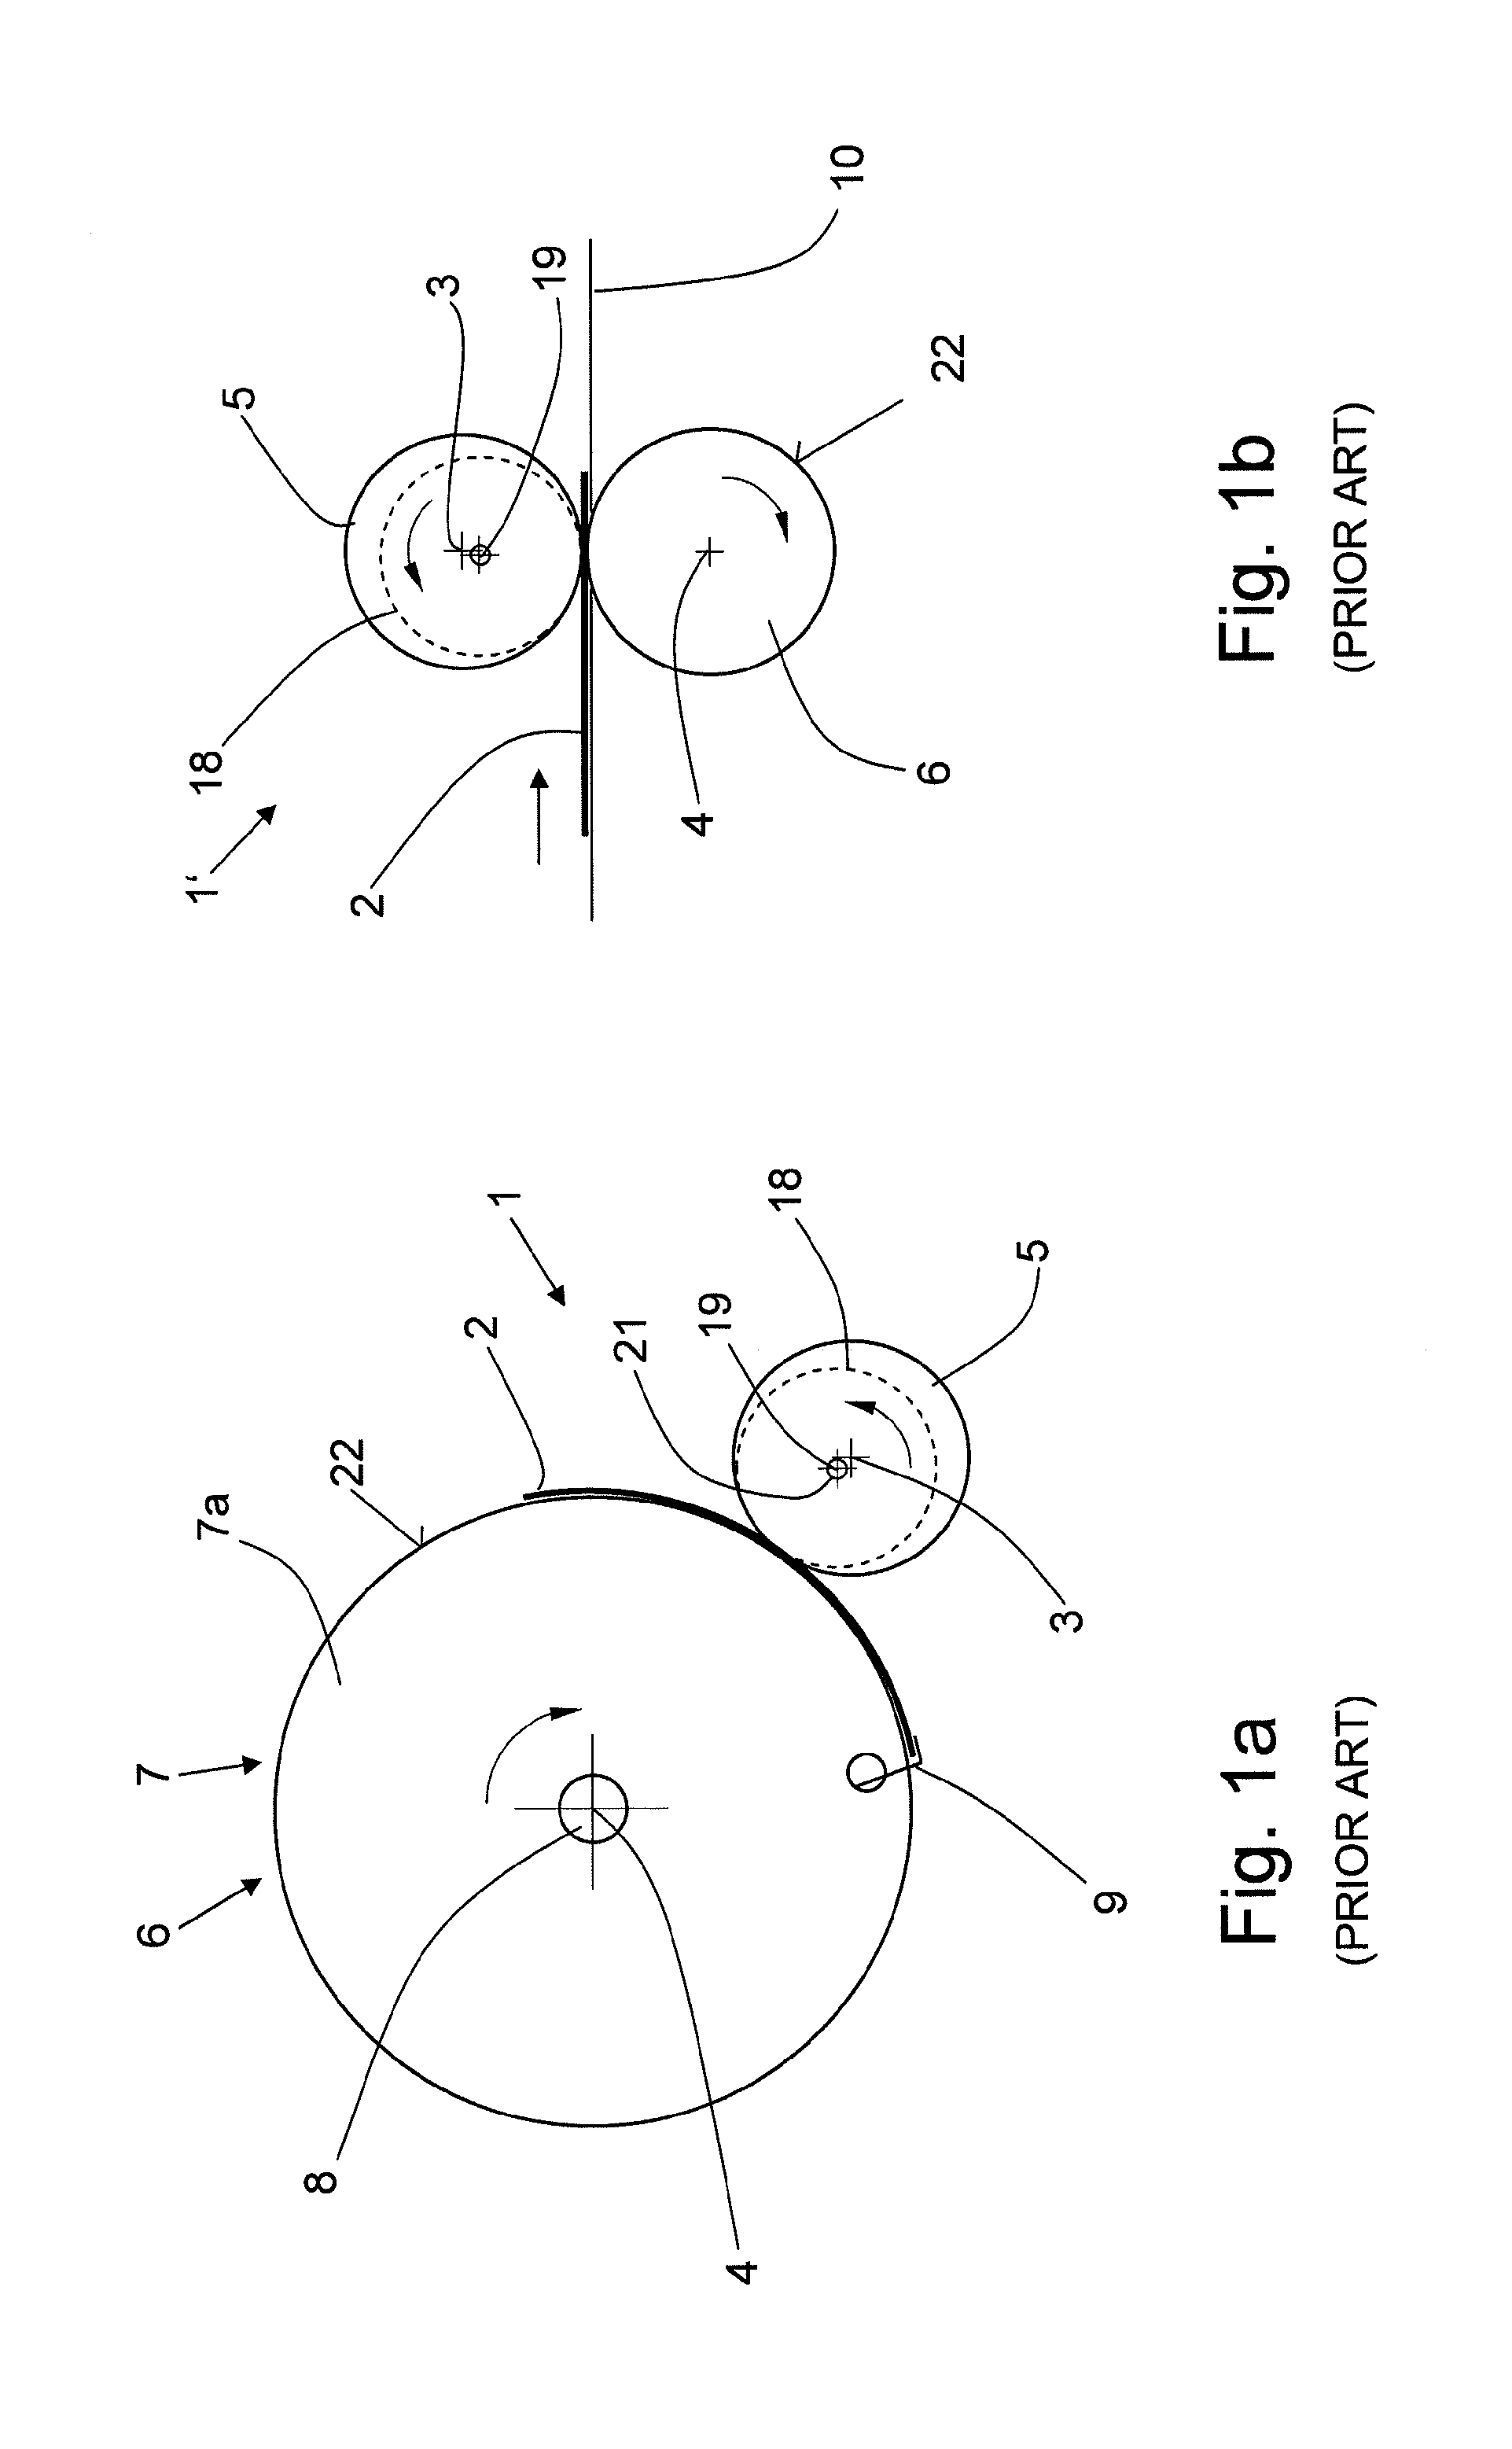 Device for forming a groove